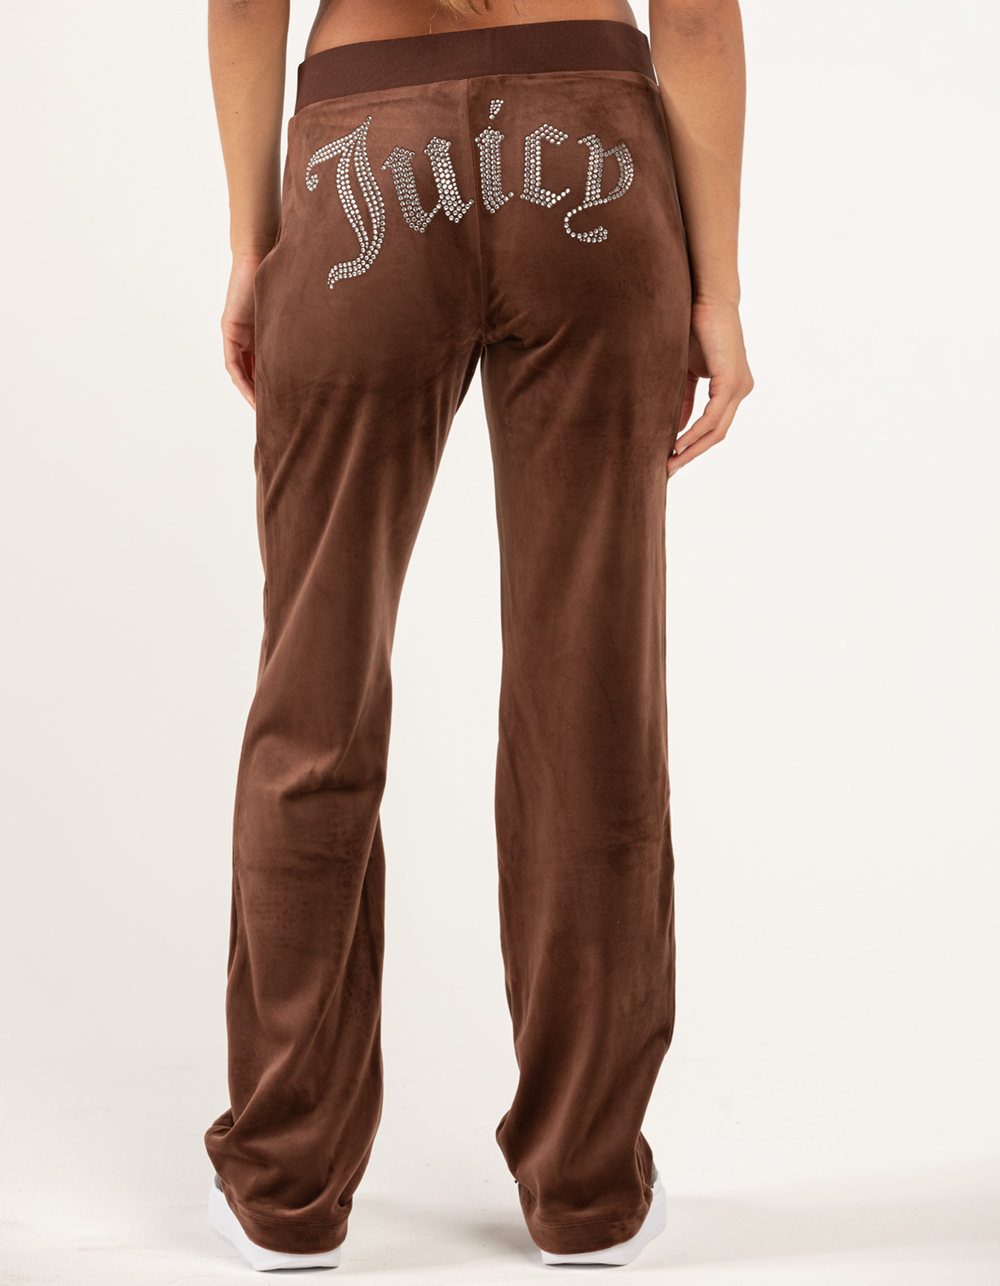 JUICY COUTURE OG Bling Womens Pants - BROWN | Tillys